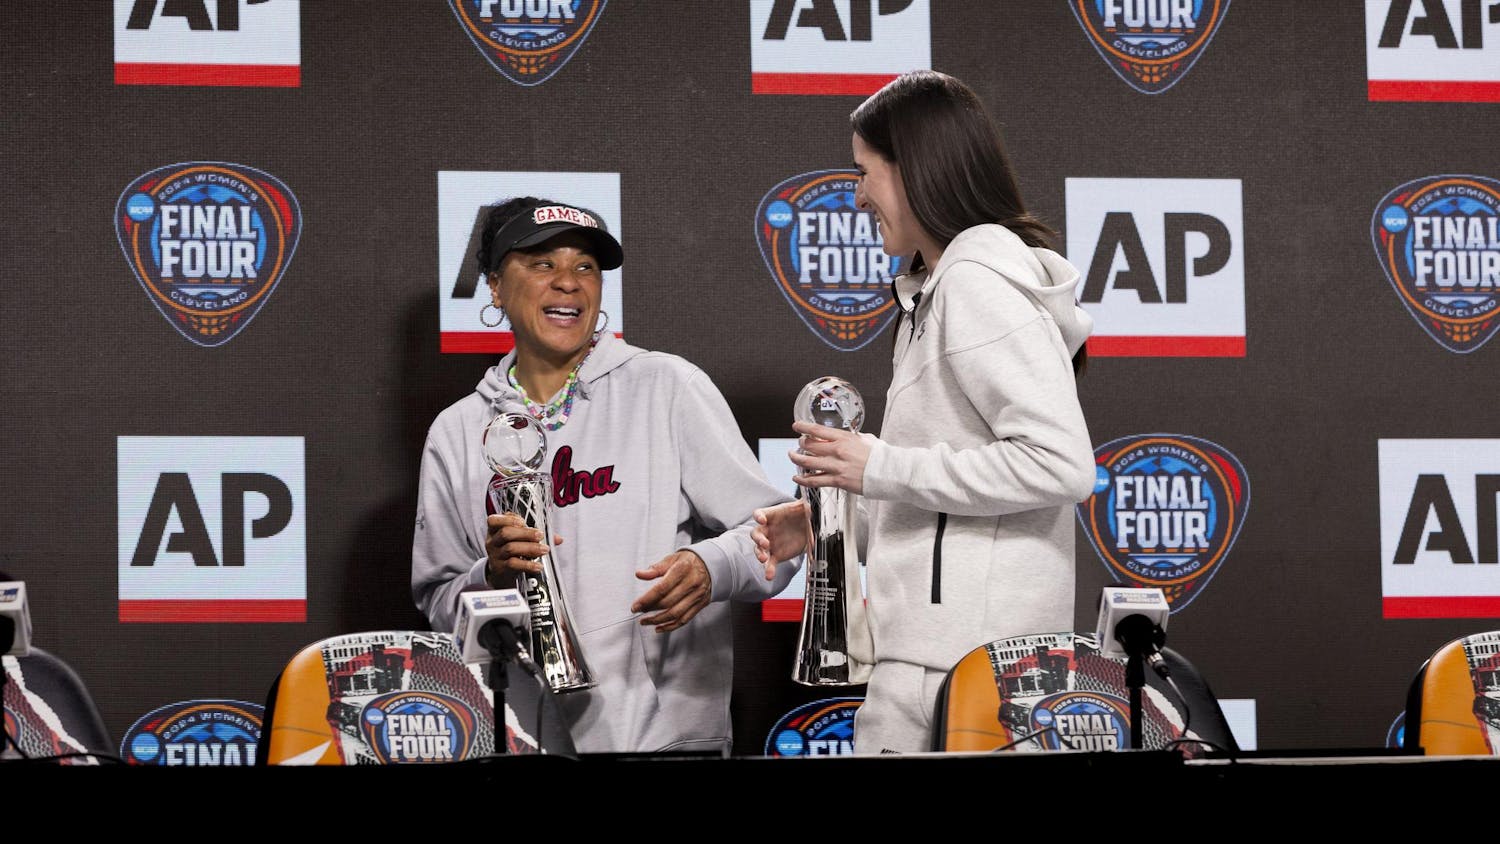 ɫɫƵ women’s basketball head coach Dawn Staley (left) and Iowa senior guard Caitlin Clark (right) laugh while walking off stage after receiving their AP Coach and Player of the year awards, respectively. This is Staley's second time winning the AP Coach of the Year award. Staley also earned the Women's Basketball Coaches Association award for the third consecutive year and the fourth time in five years.